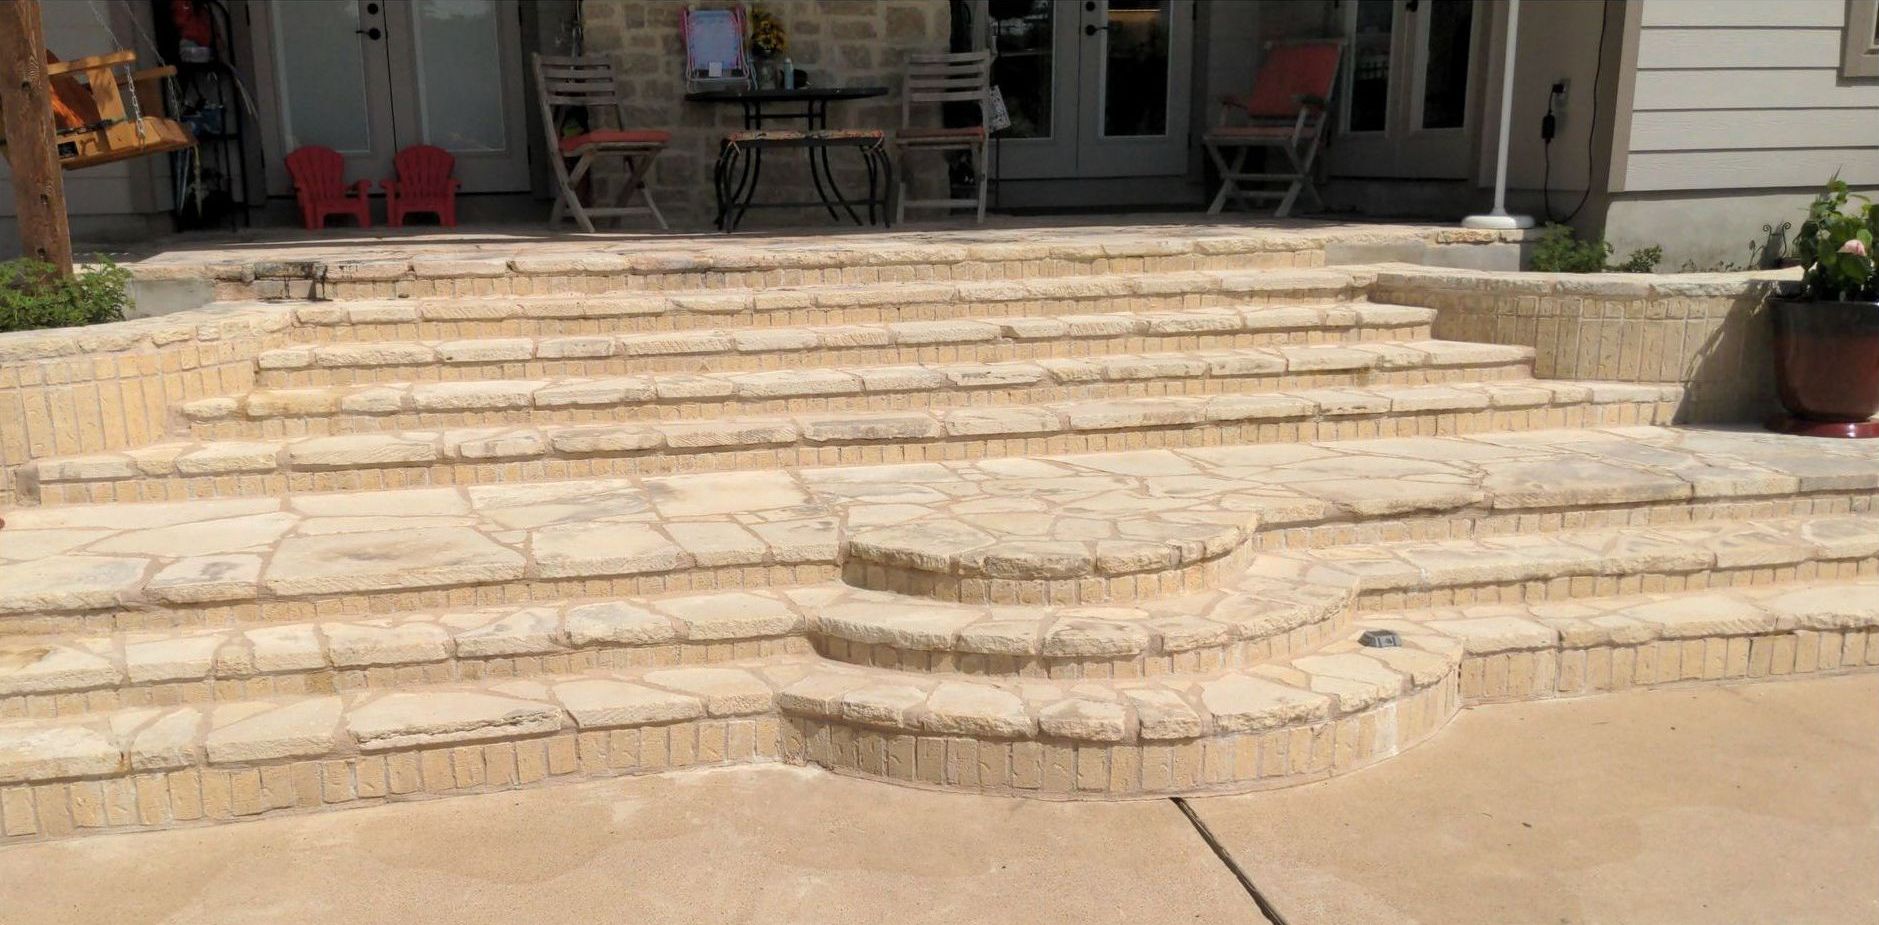 A concrete patio with stairs leading up to a house.